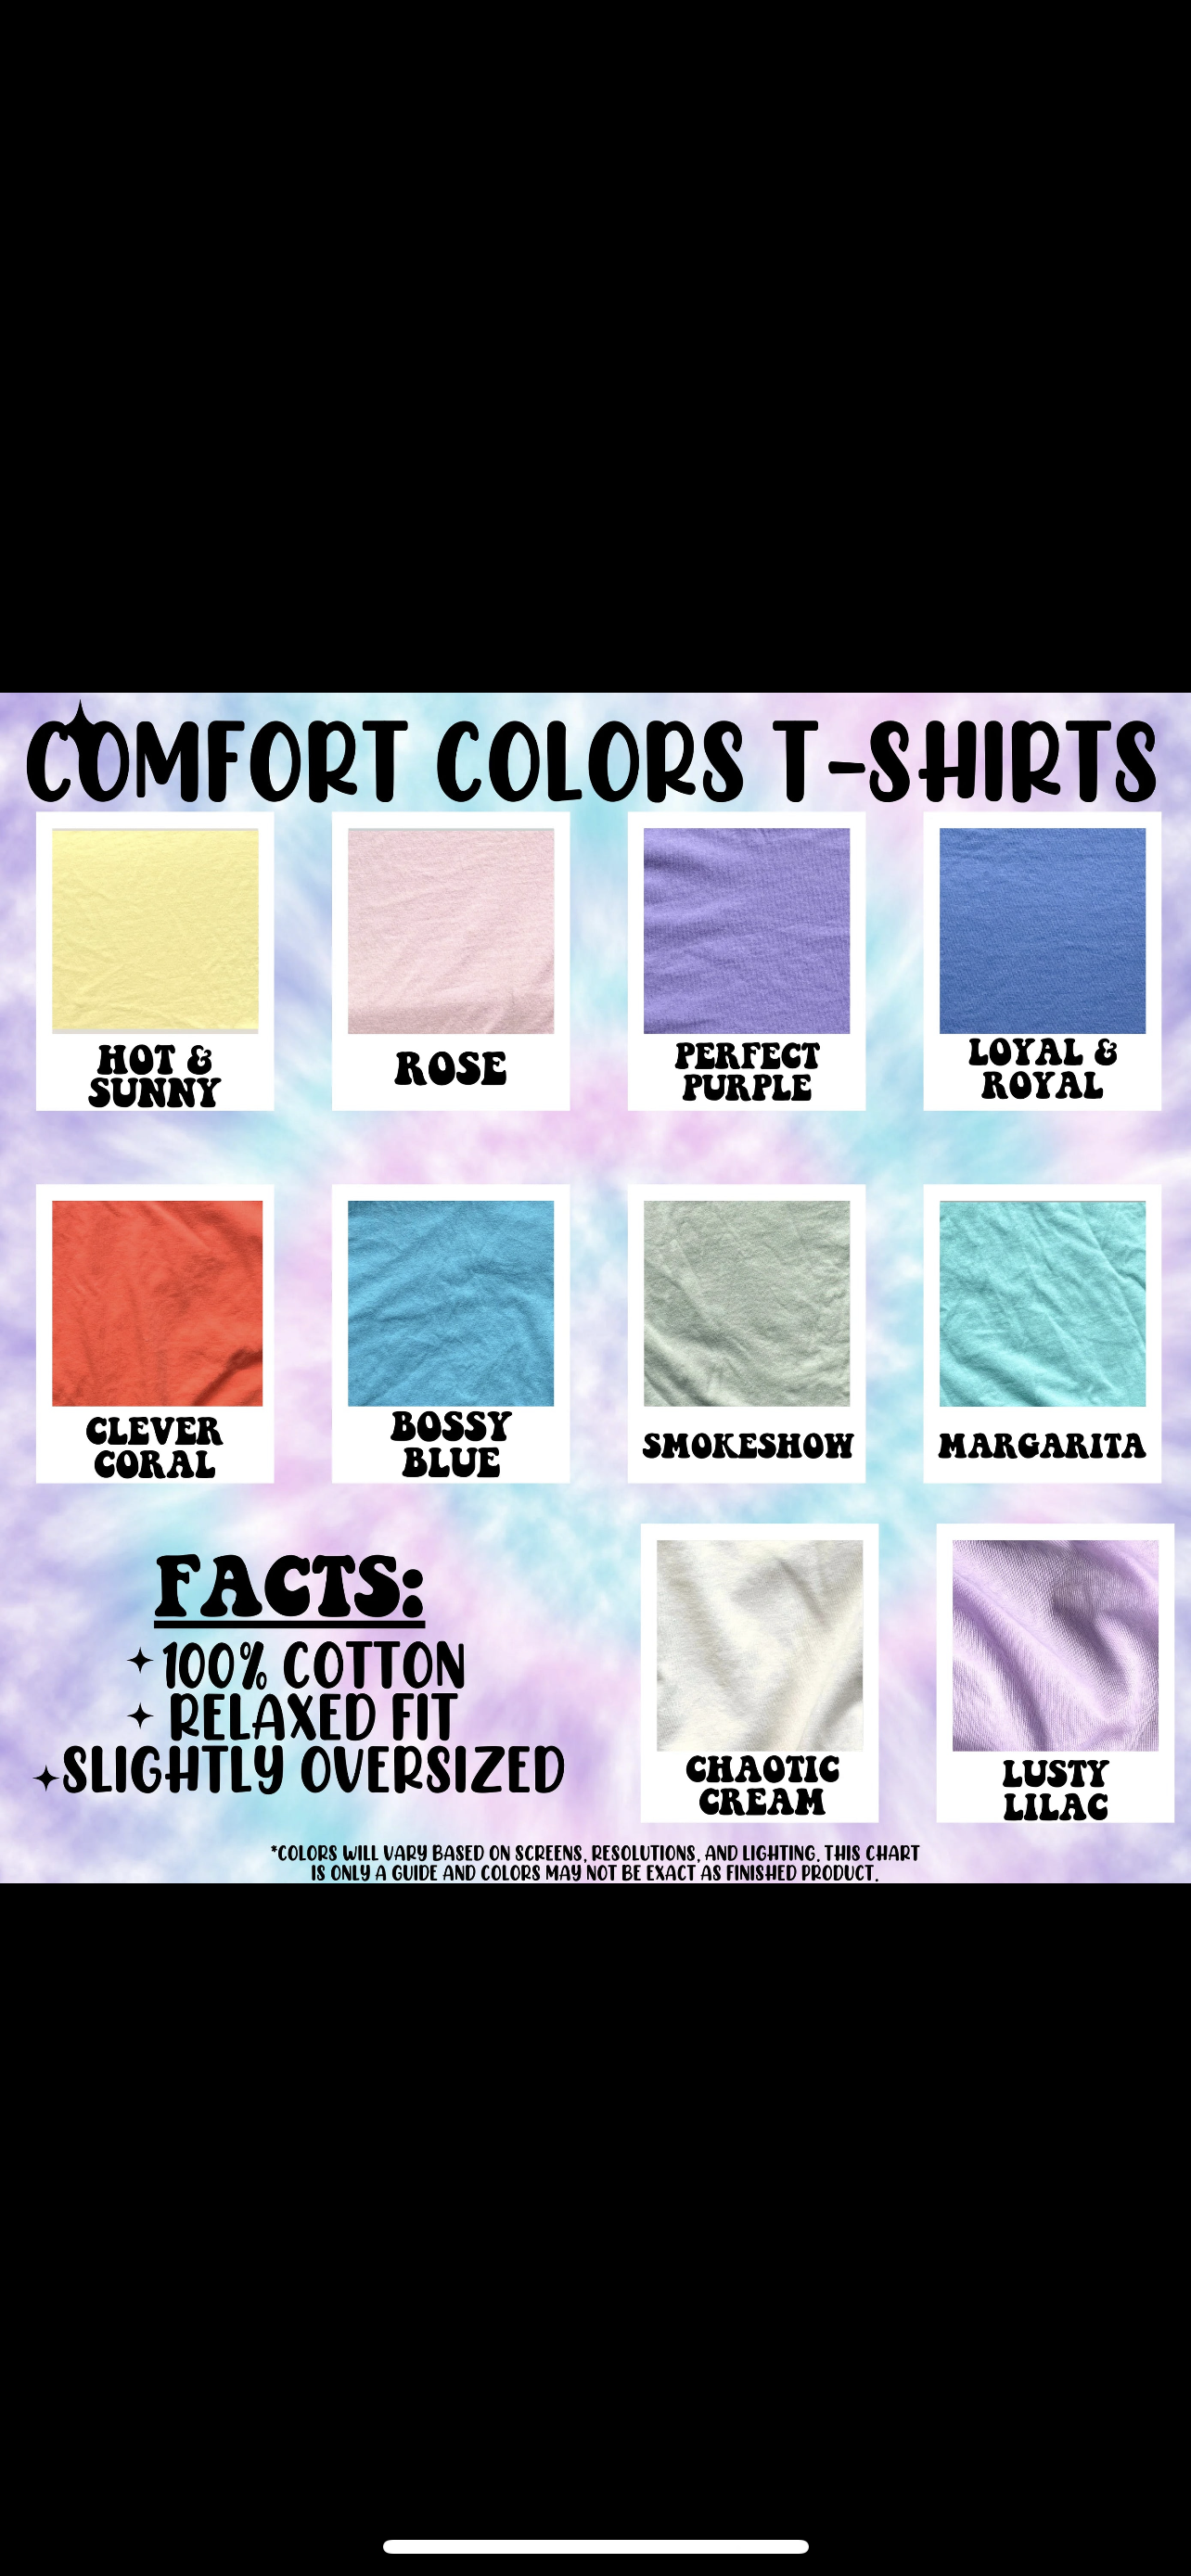 My bestie and I talk shit about you Comfort Colors T-shirt